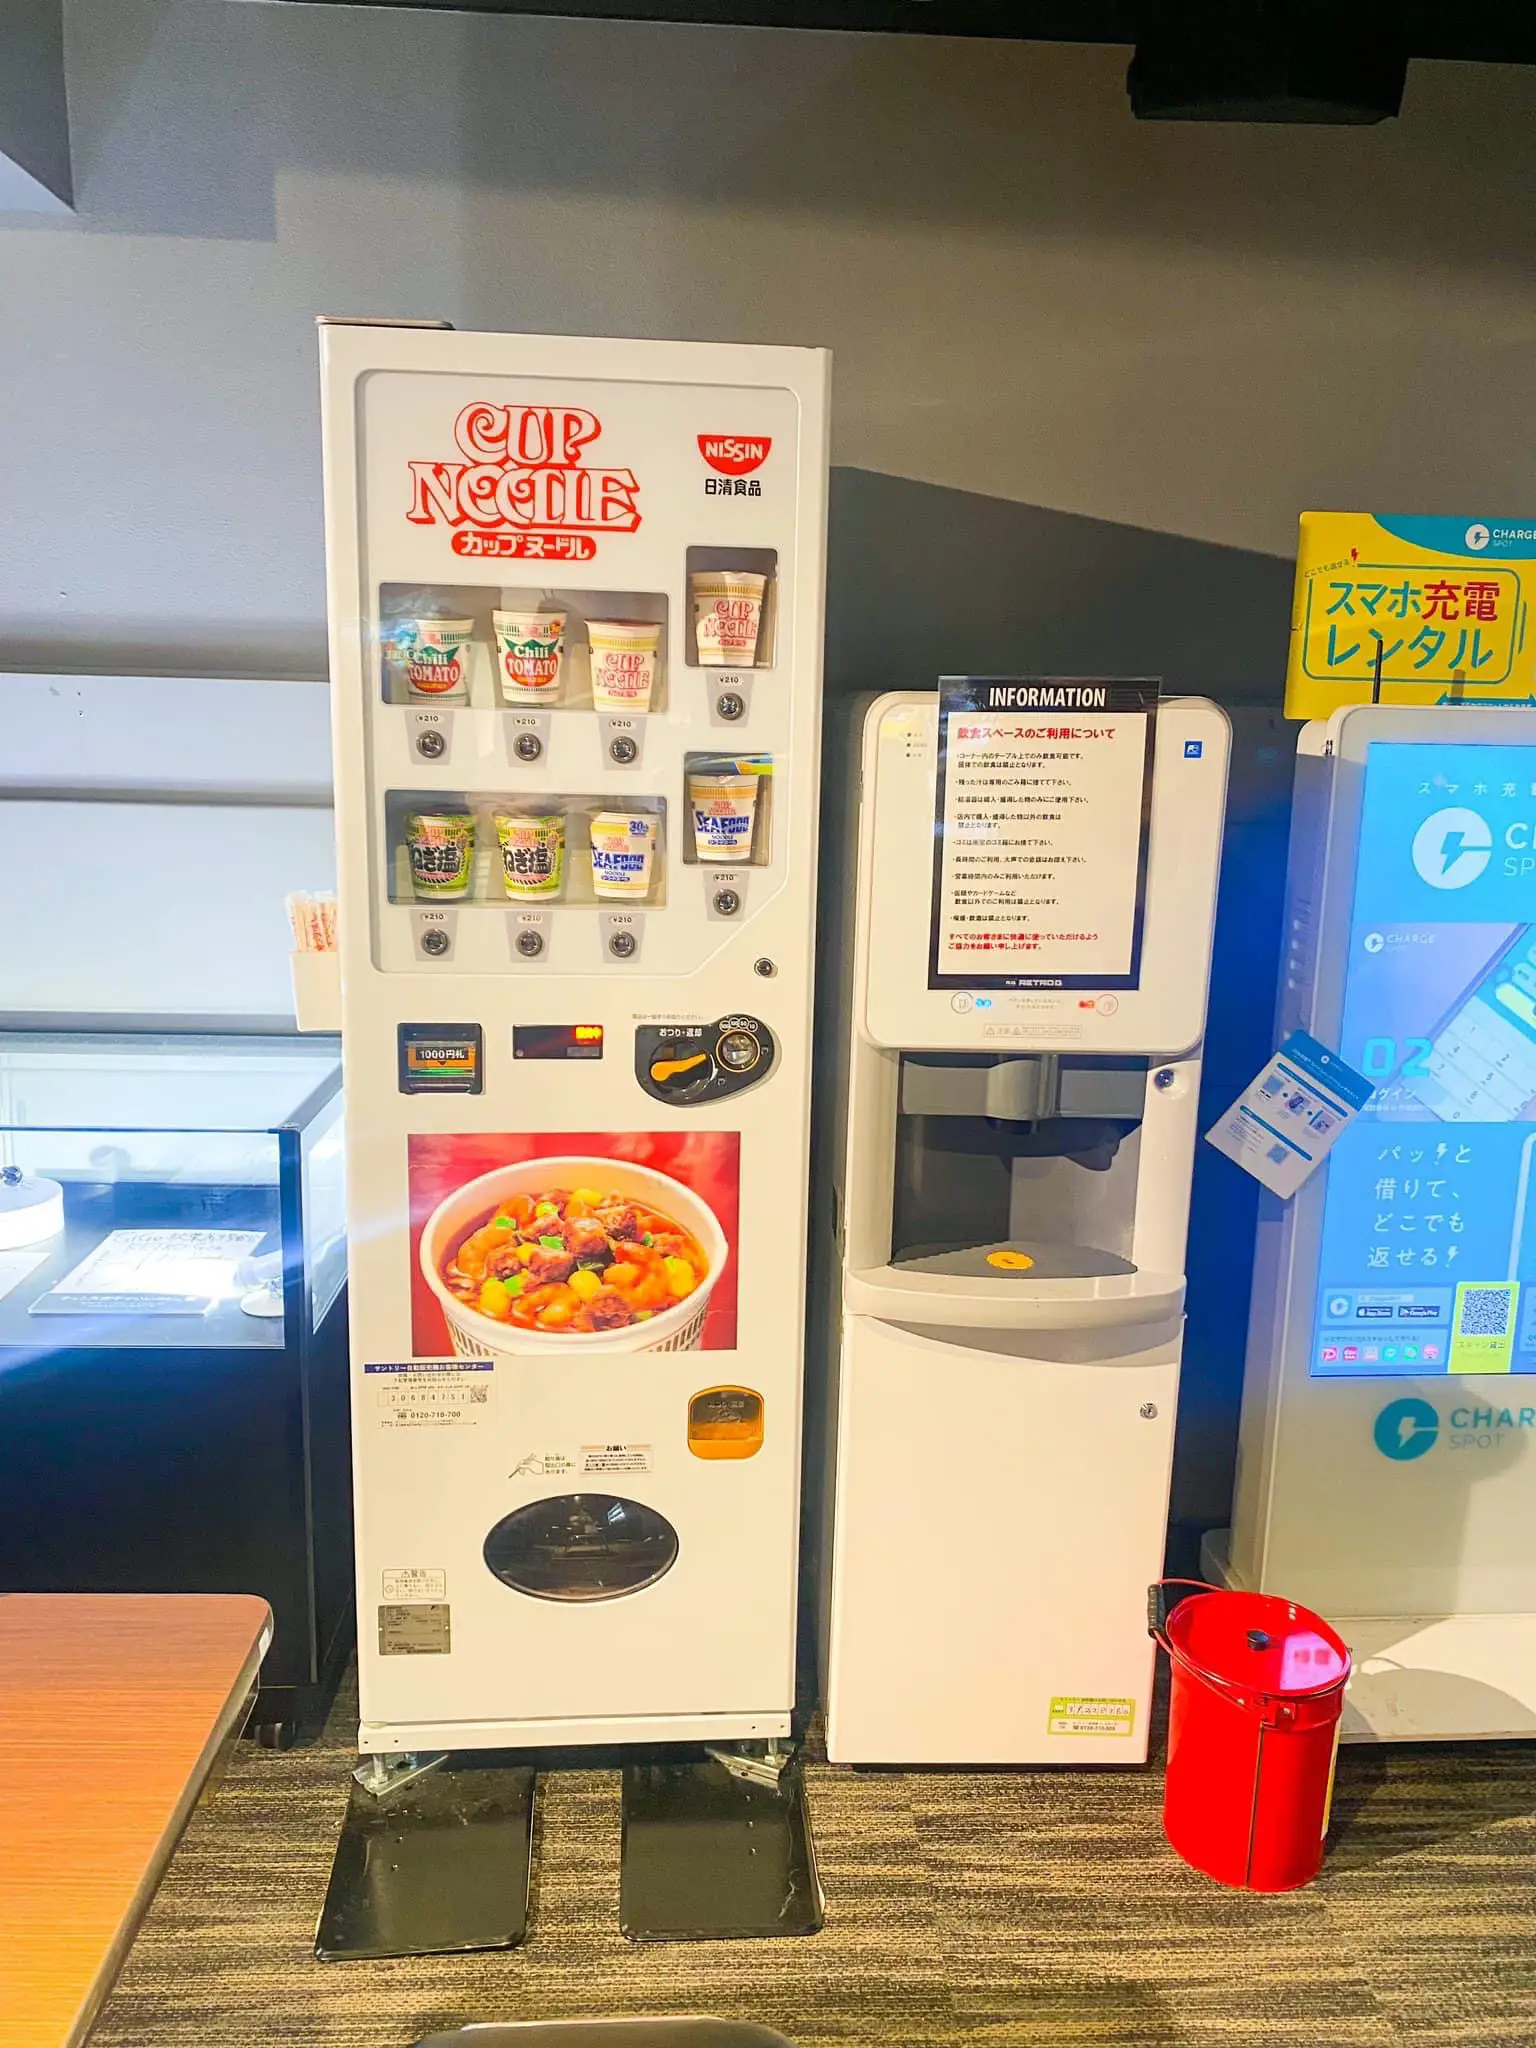 Check Out These Crazy Japanese Vending Machines You Won't Find